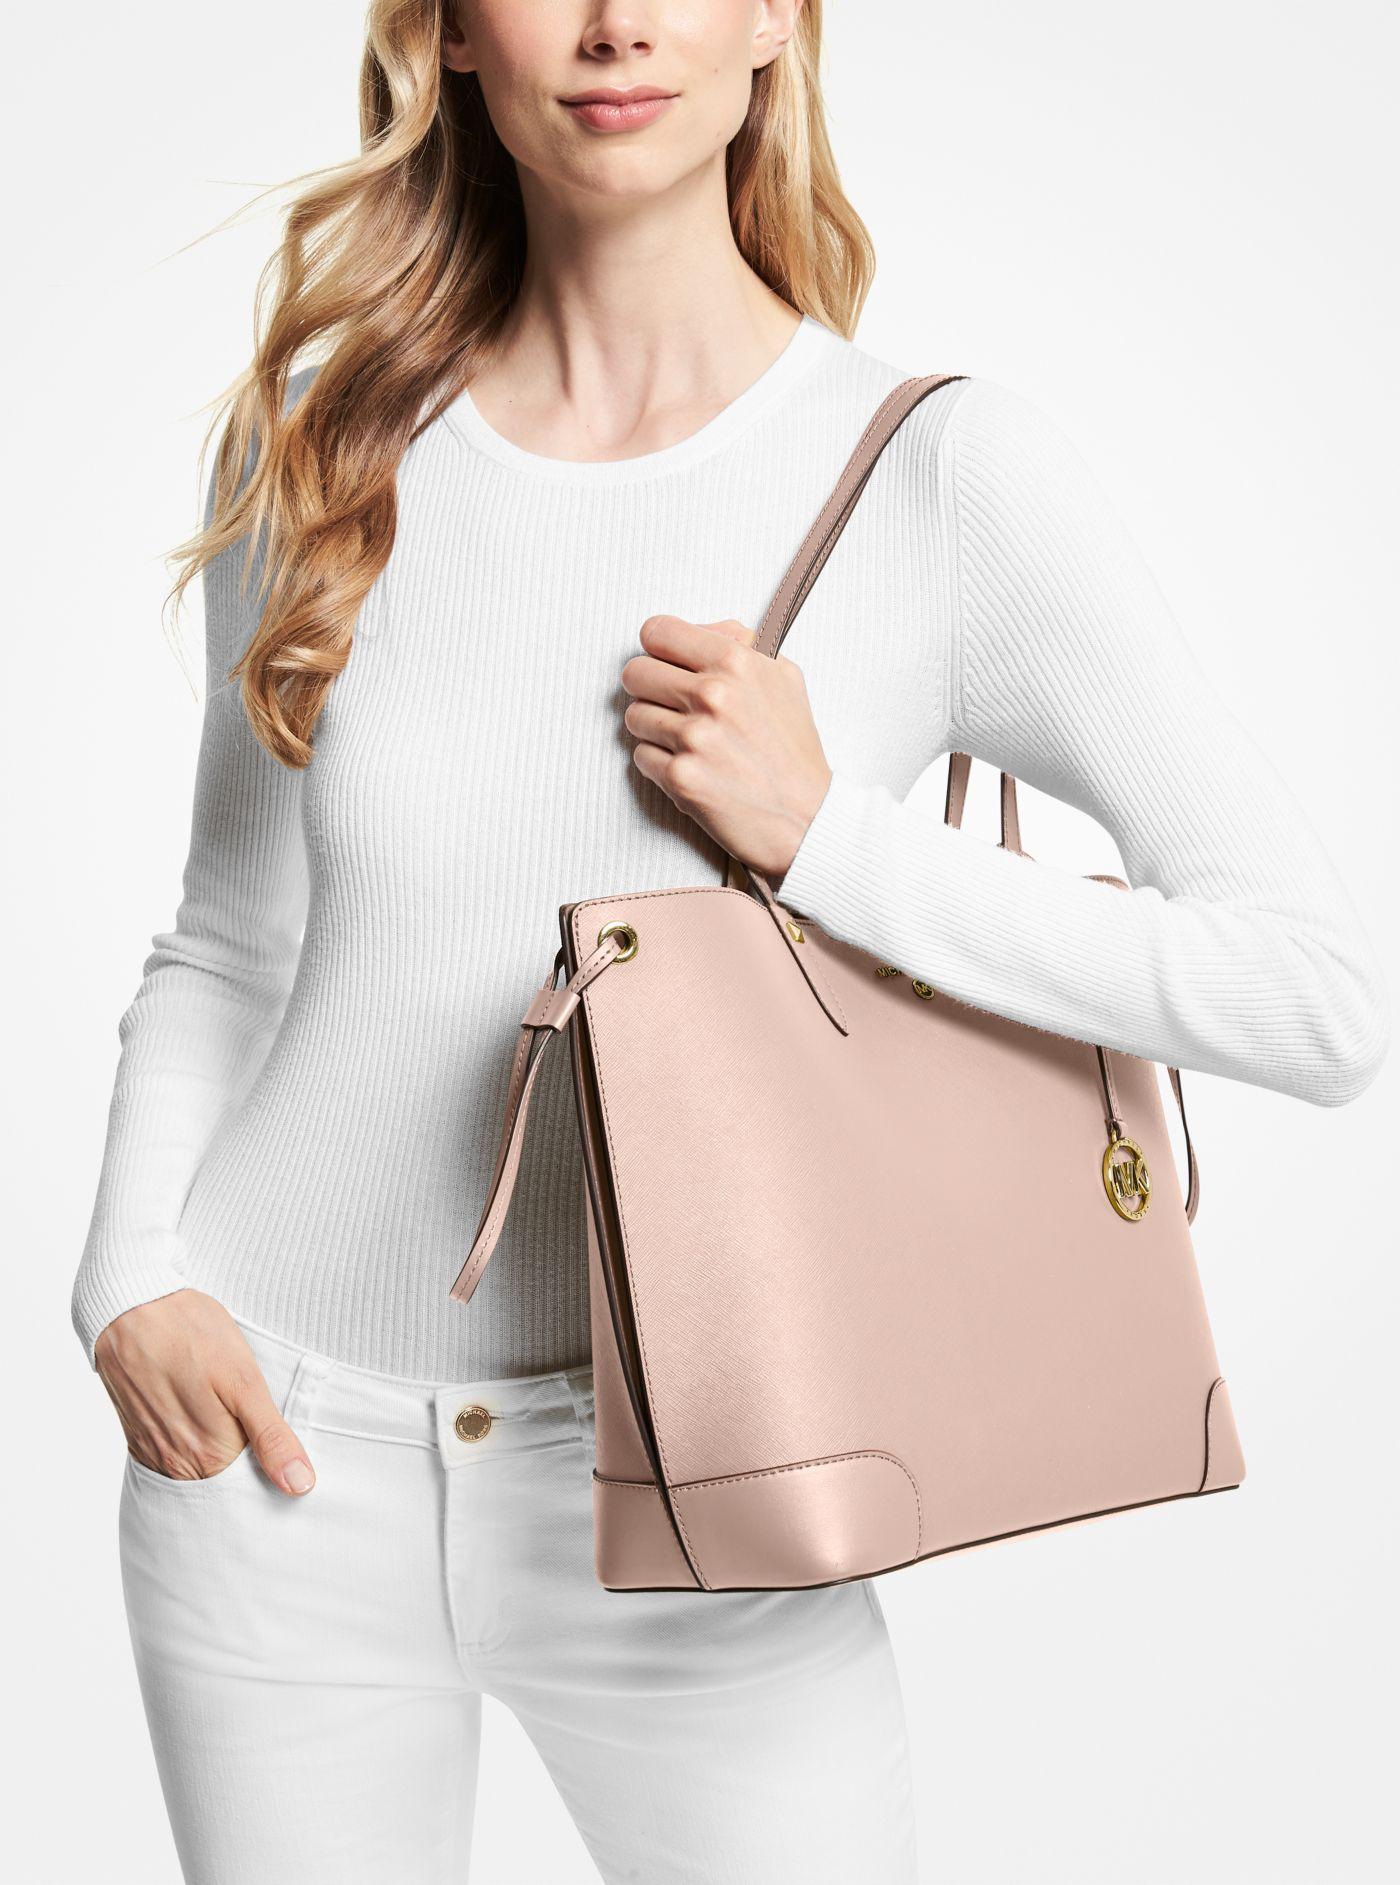 Michael Kors Edith Large Saffiano Leather Tote Bag in Pink | Lyst Canada